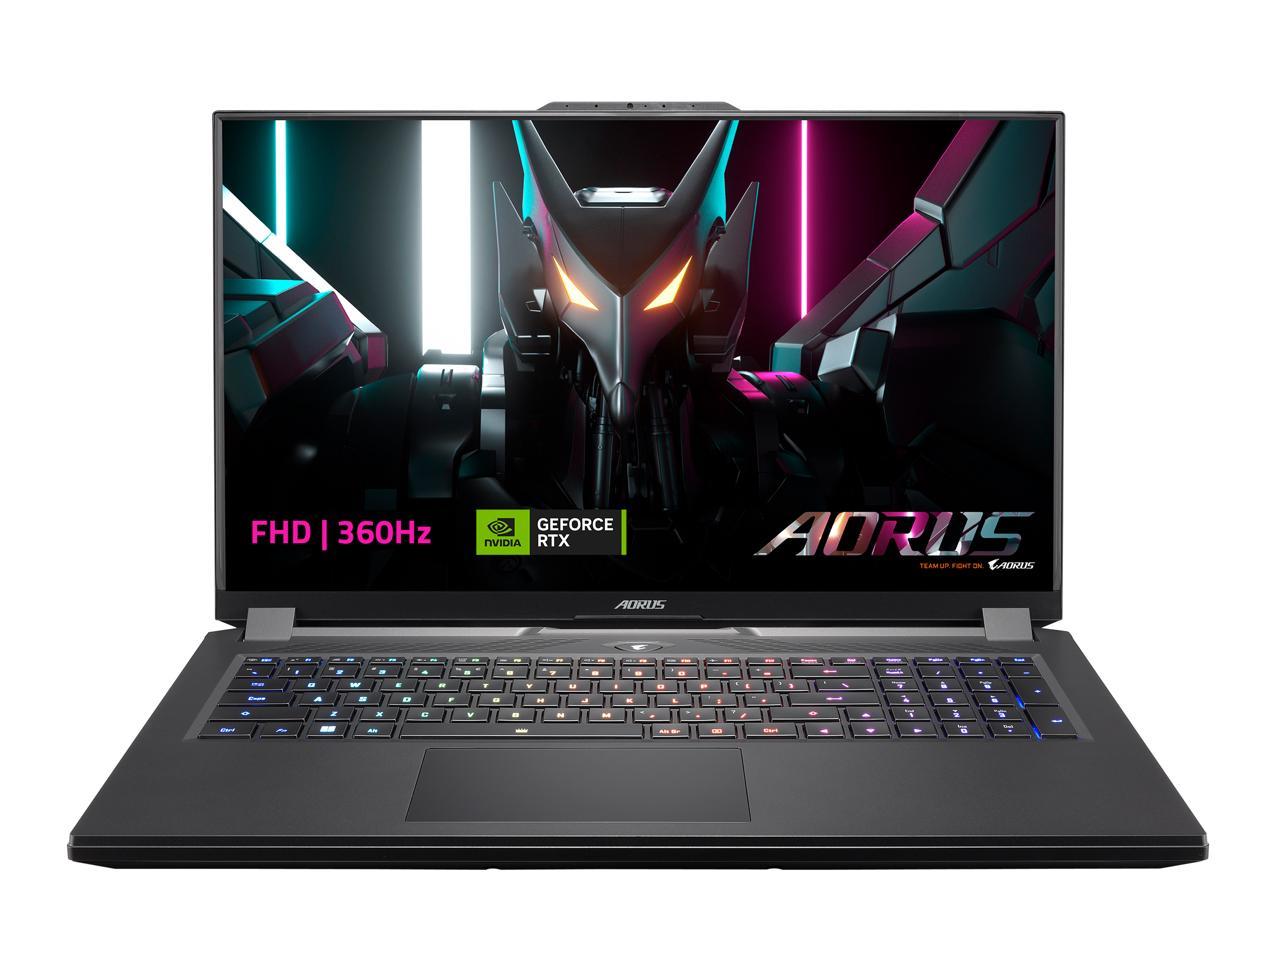 DELA DISCOUNT Hi9NPzRHCQwyk2iQJLHSC8 Where to buy an RTX 4080 or RTX 4090 gaming laptop — now shipping DELA DISCOUNT  